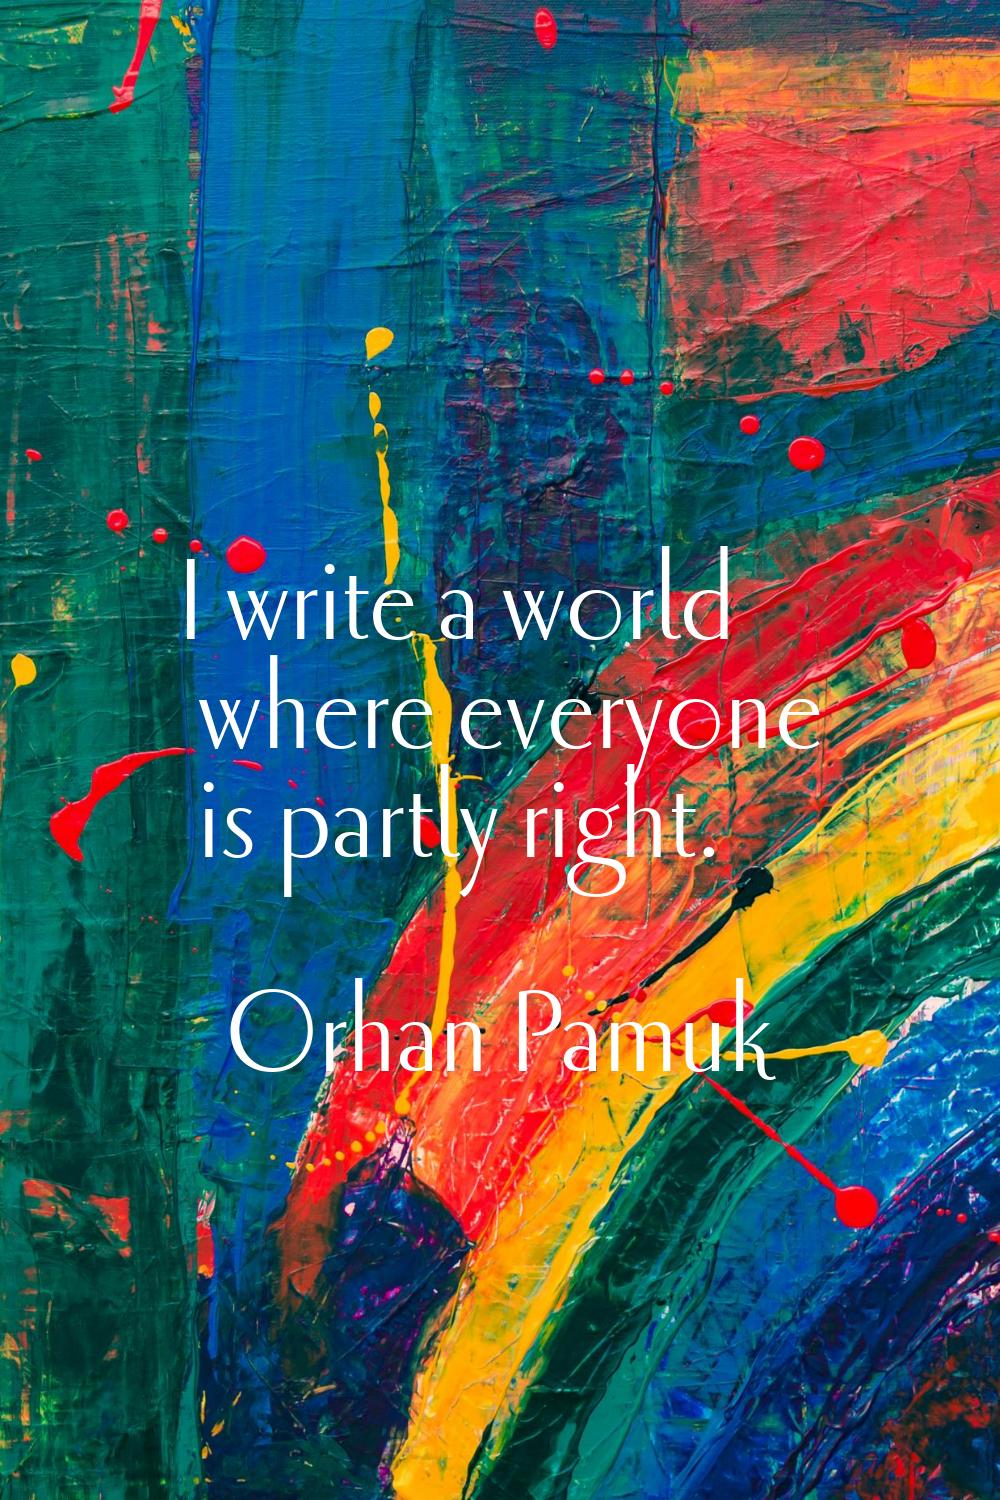 I write a world where everyone is partly right.